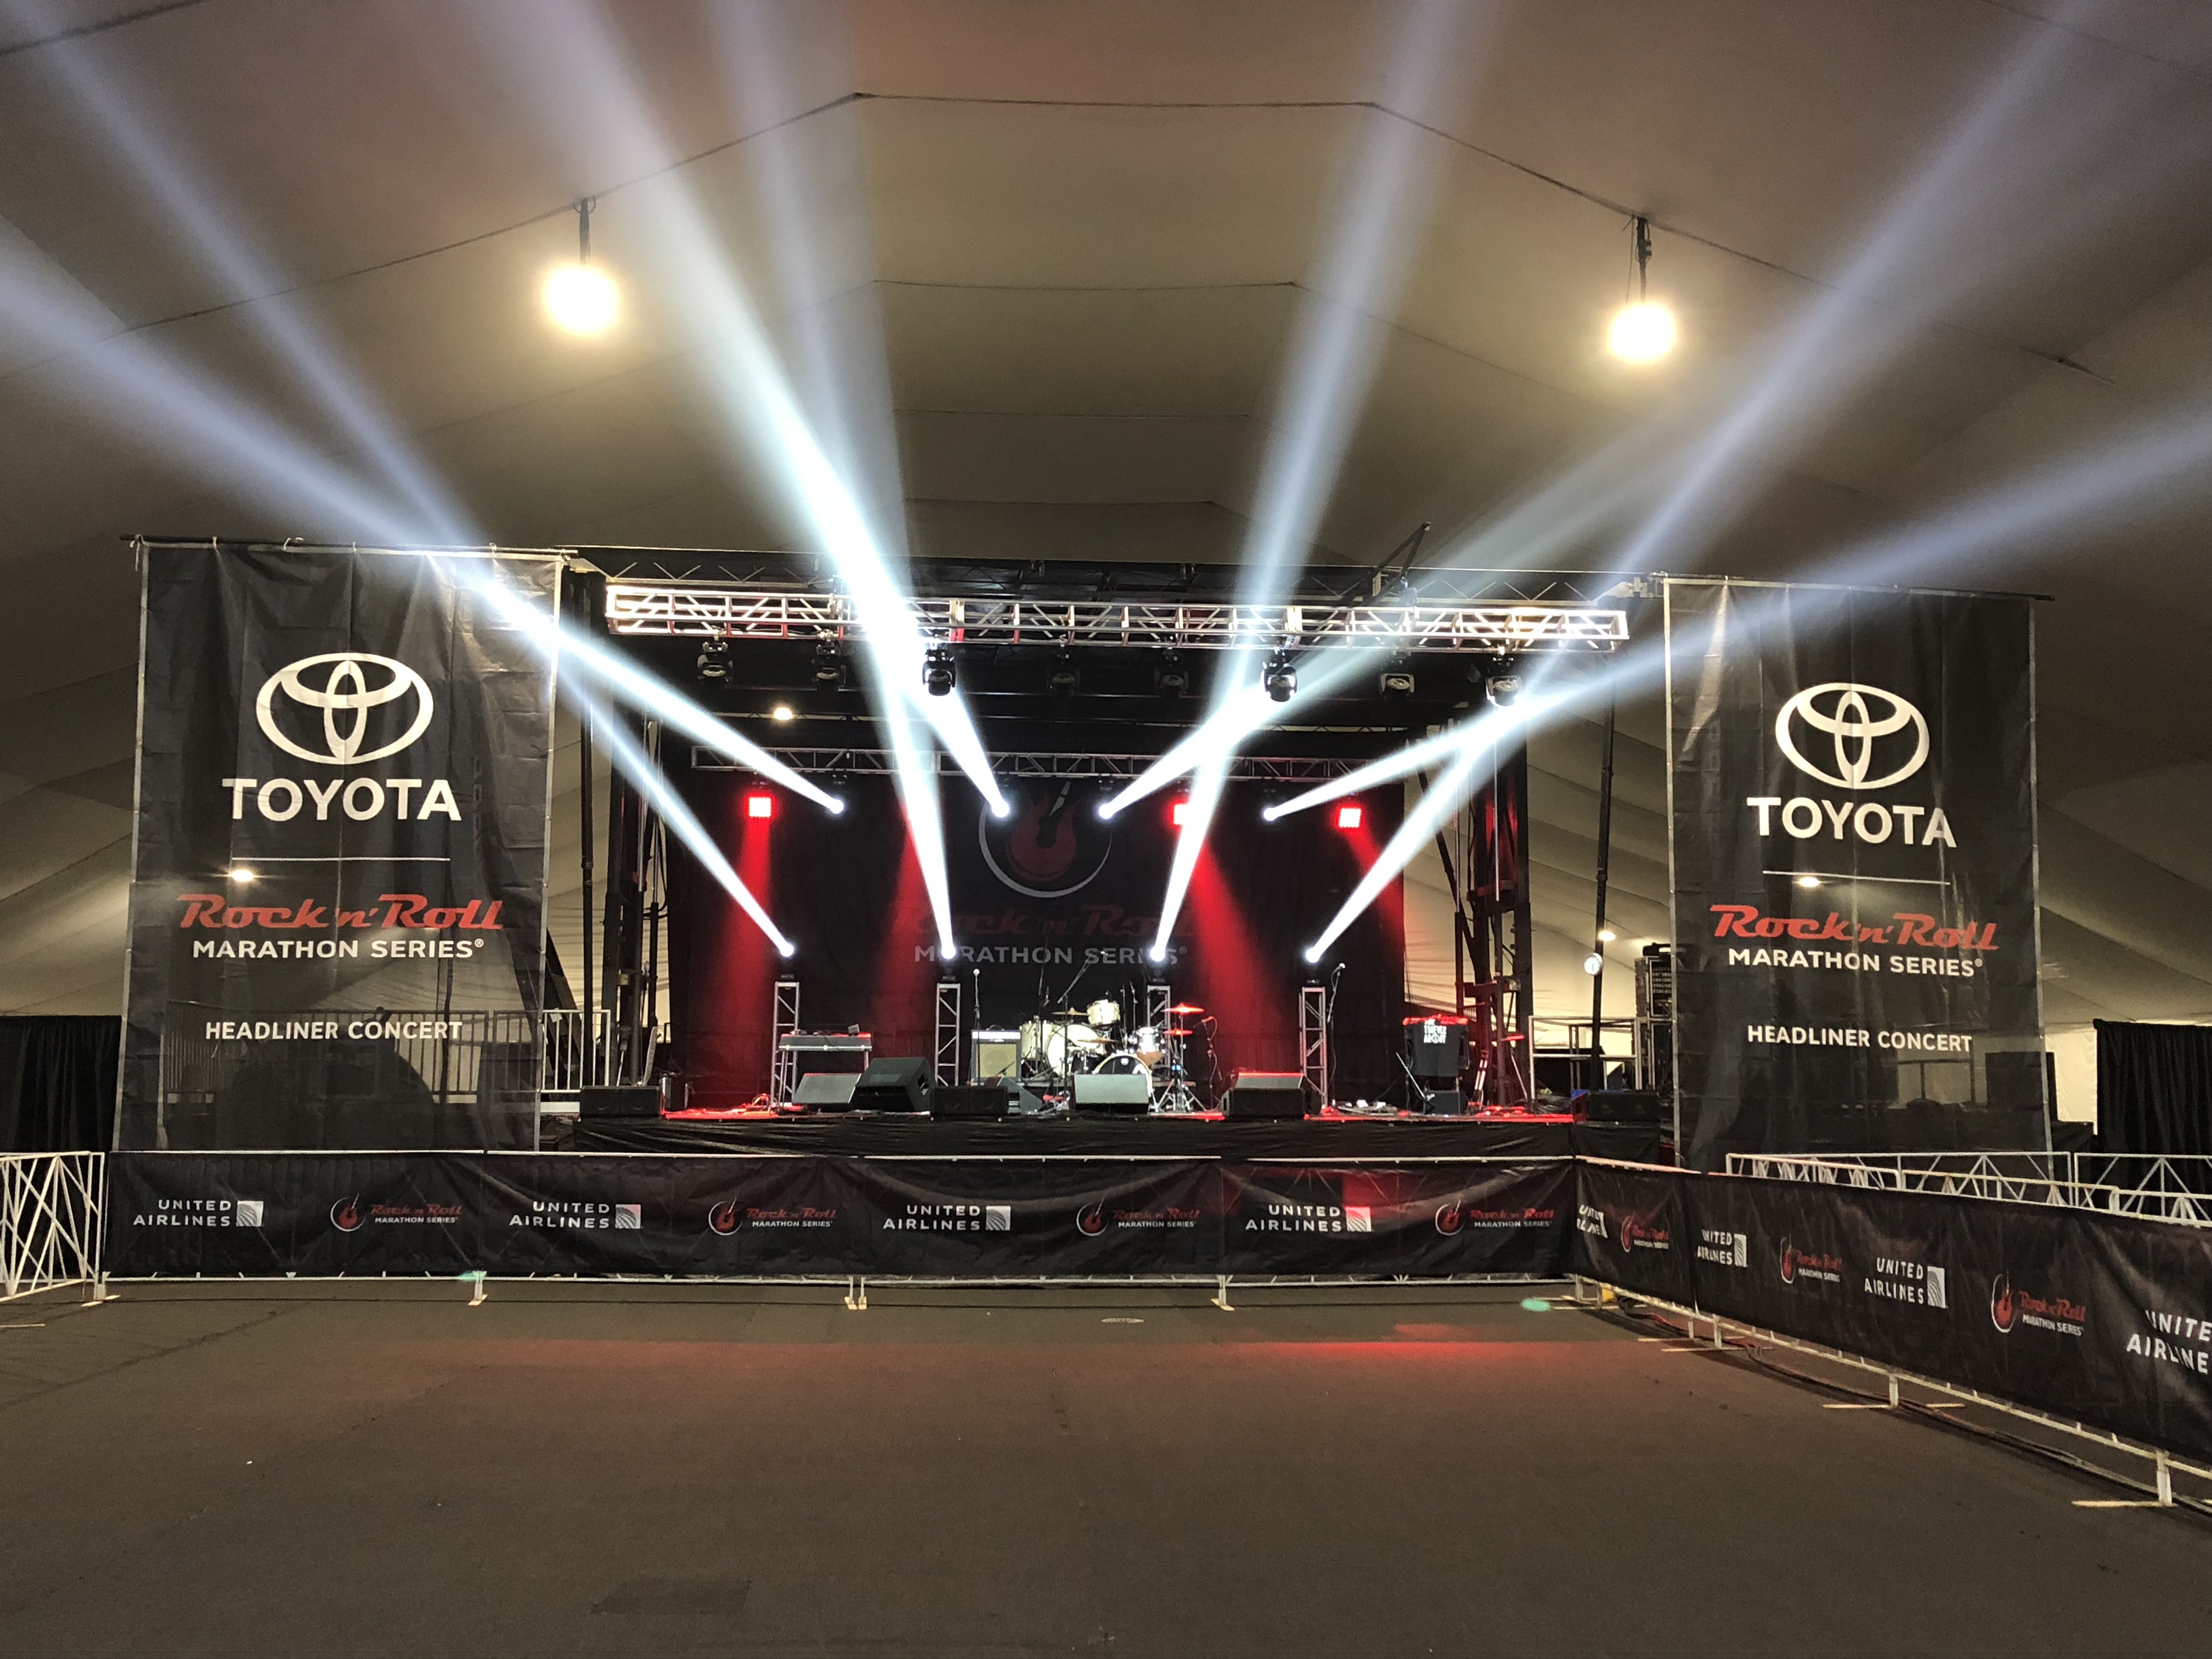 Lighting and stage for the Toyota event